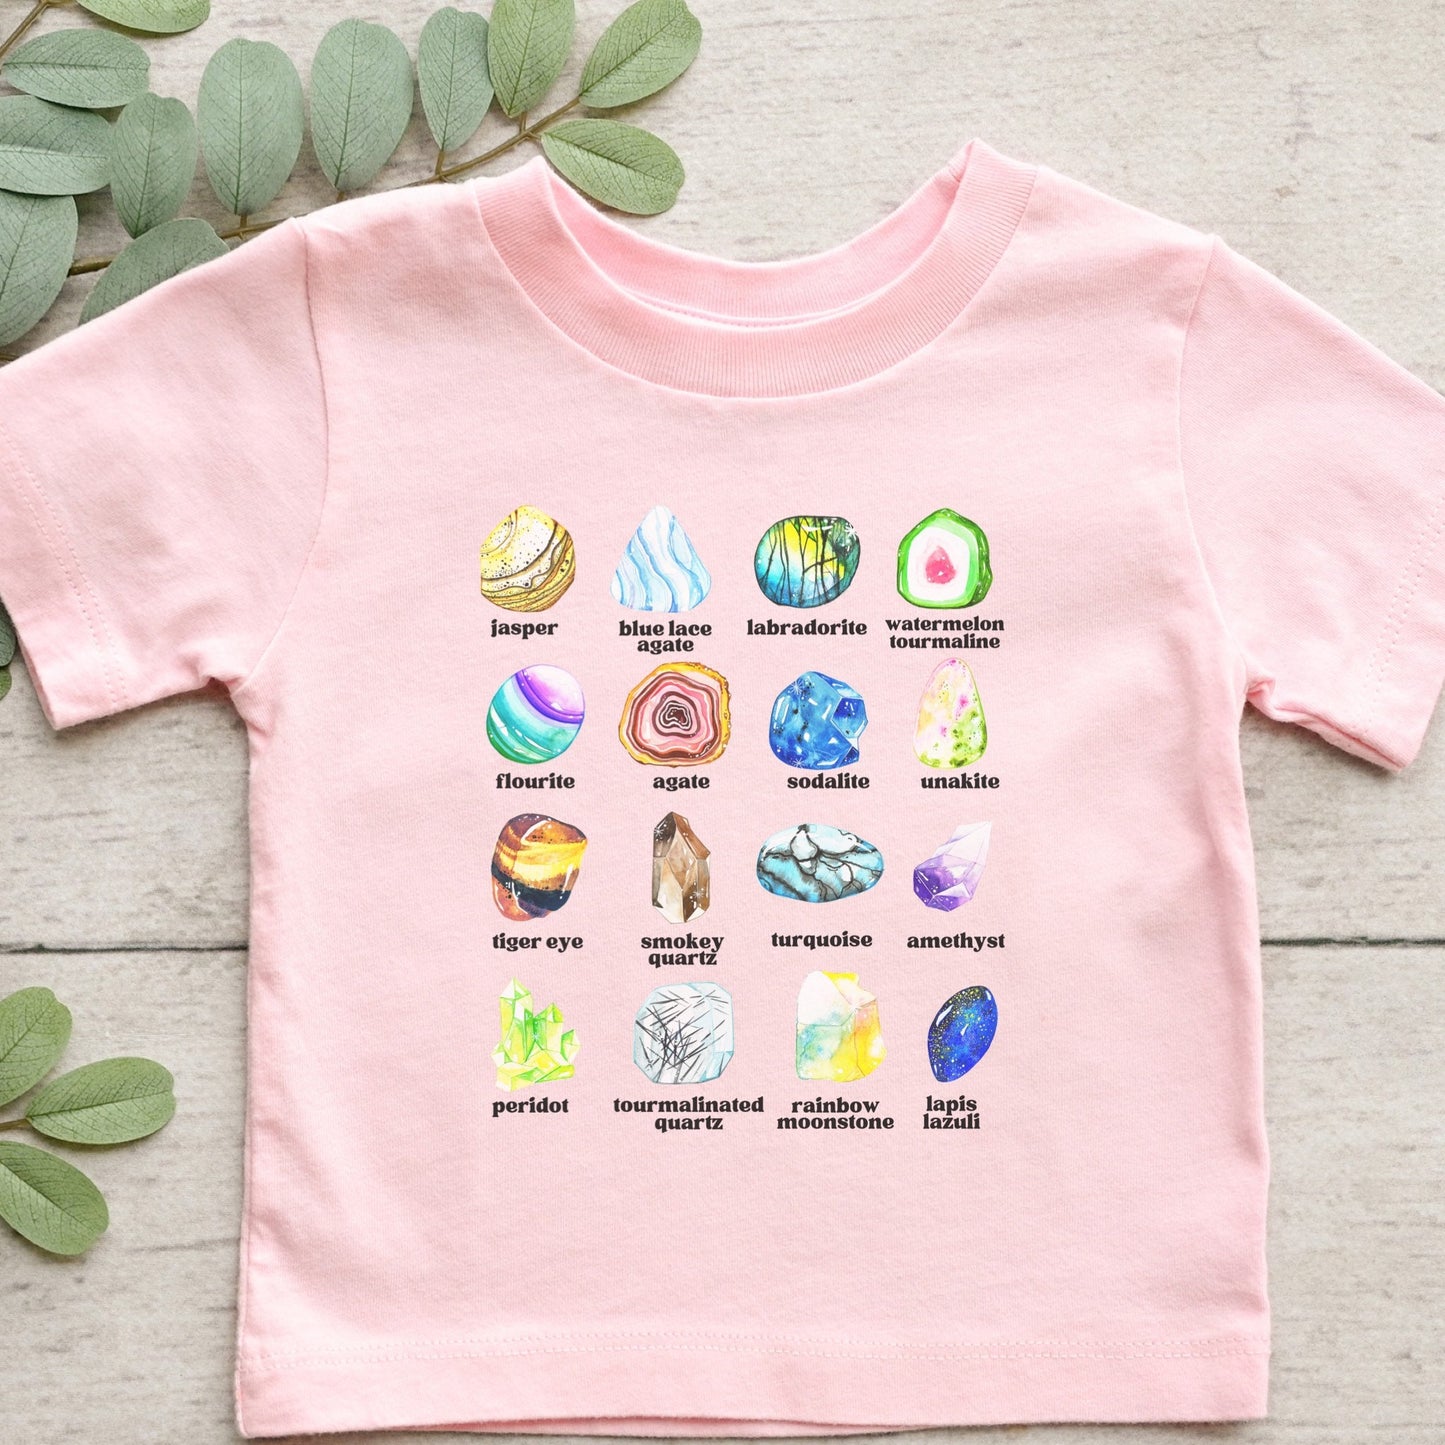 Kids Crystal T-shirts, Crystal Shirt For Toddlers, Gem and Mineral Shirt, Educational Gift Interactive Shirt For Kids, Mystical Shirt Girl